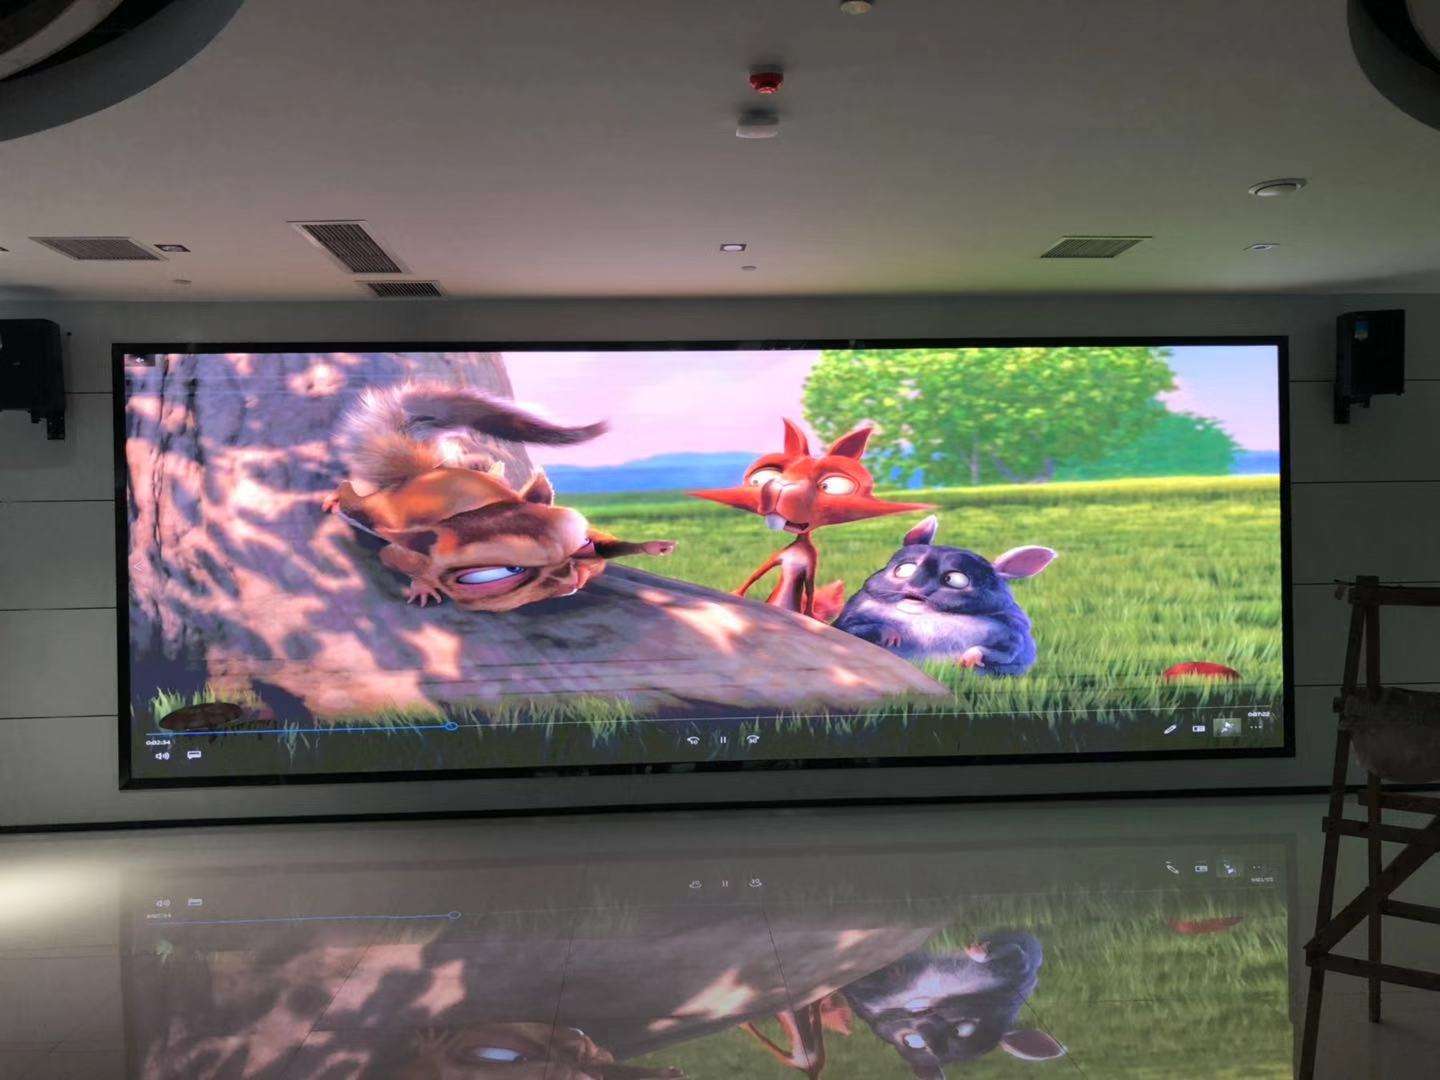 Design principle of indoor outdoor led video display - china top led ...